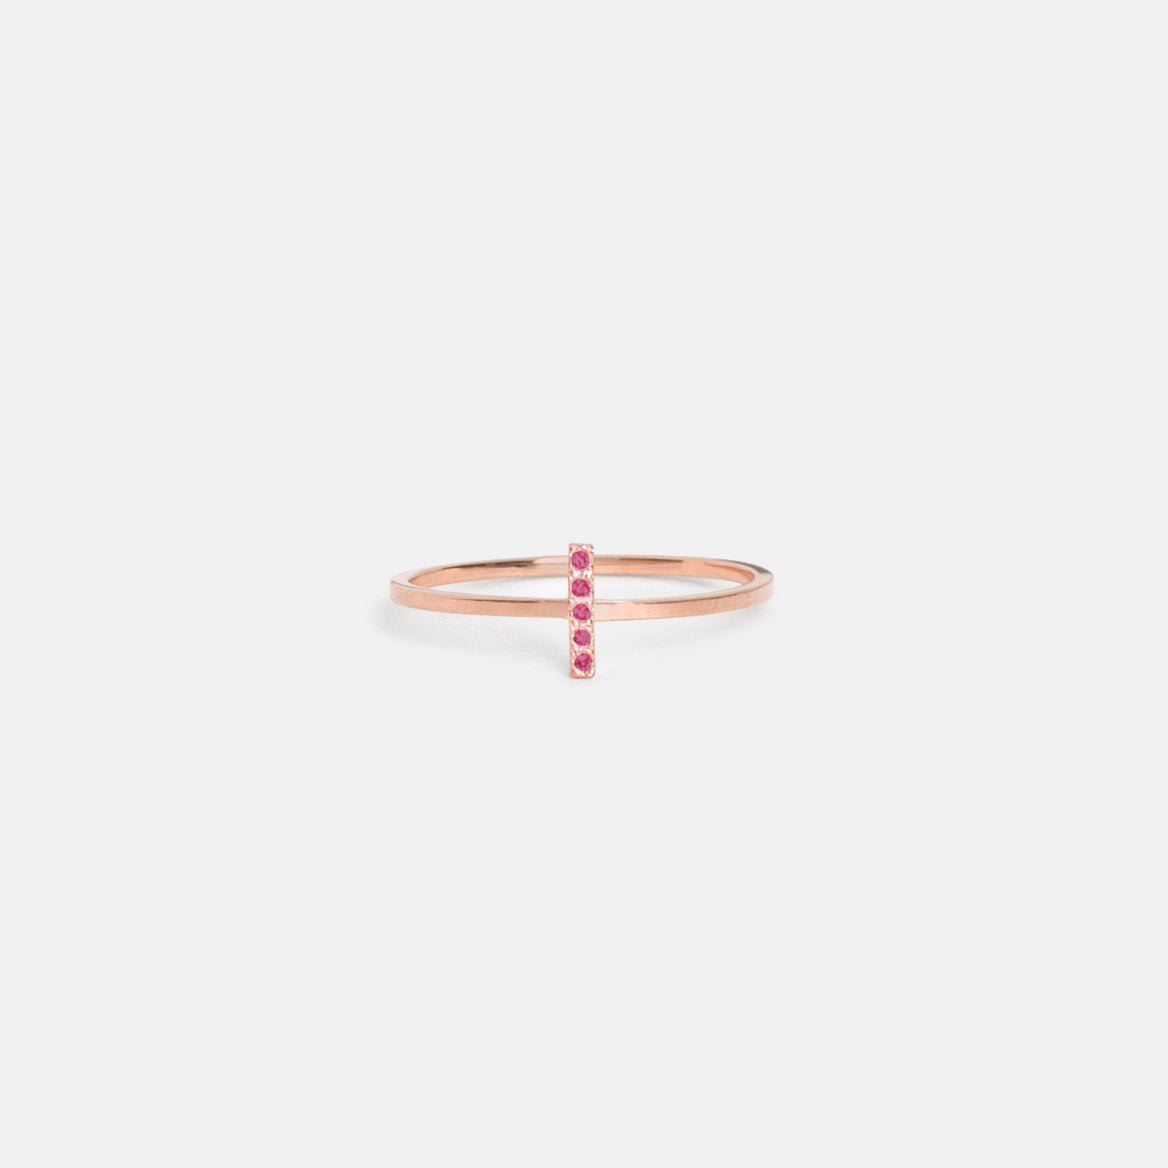 Stevi Handmade Ring in 14k Rose Gold set with Rubies by SHW Fine Jewelry